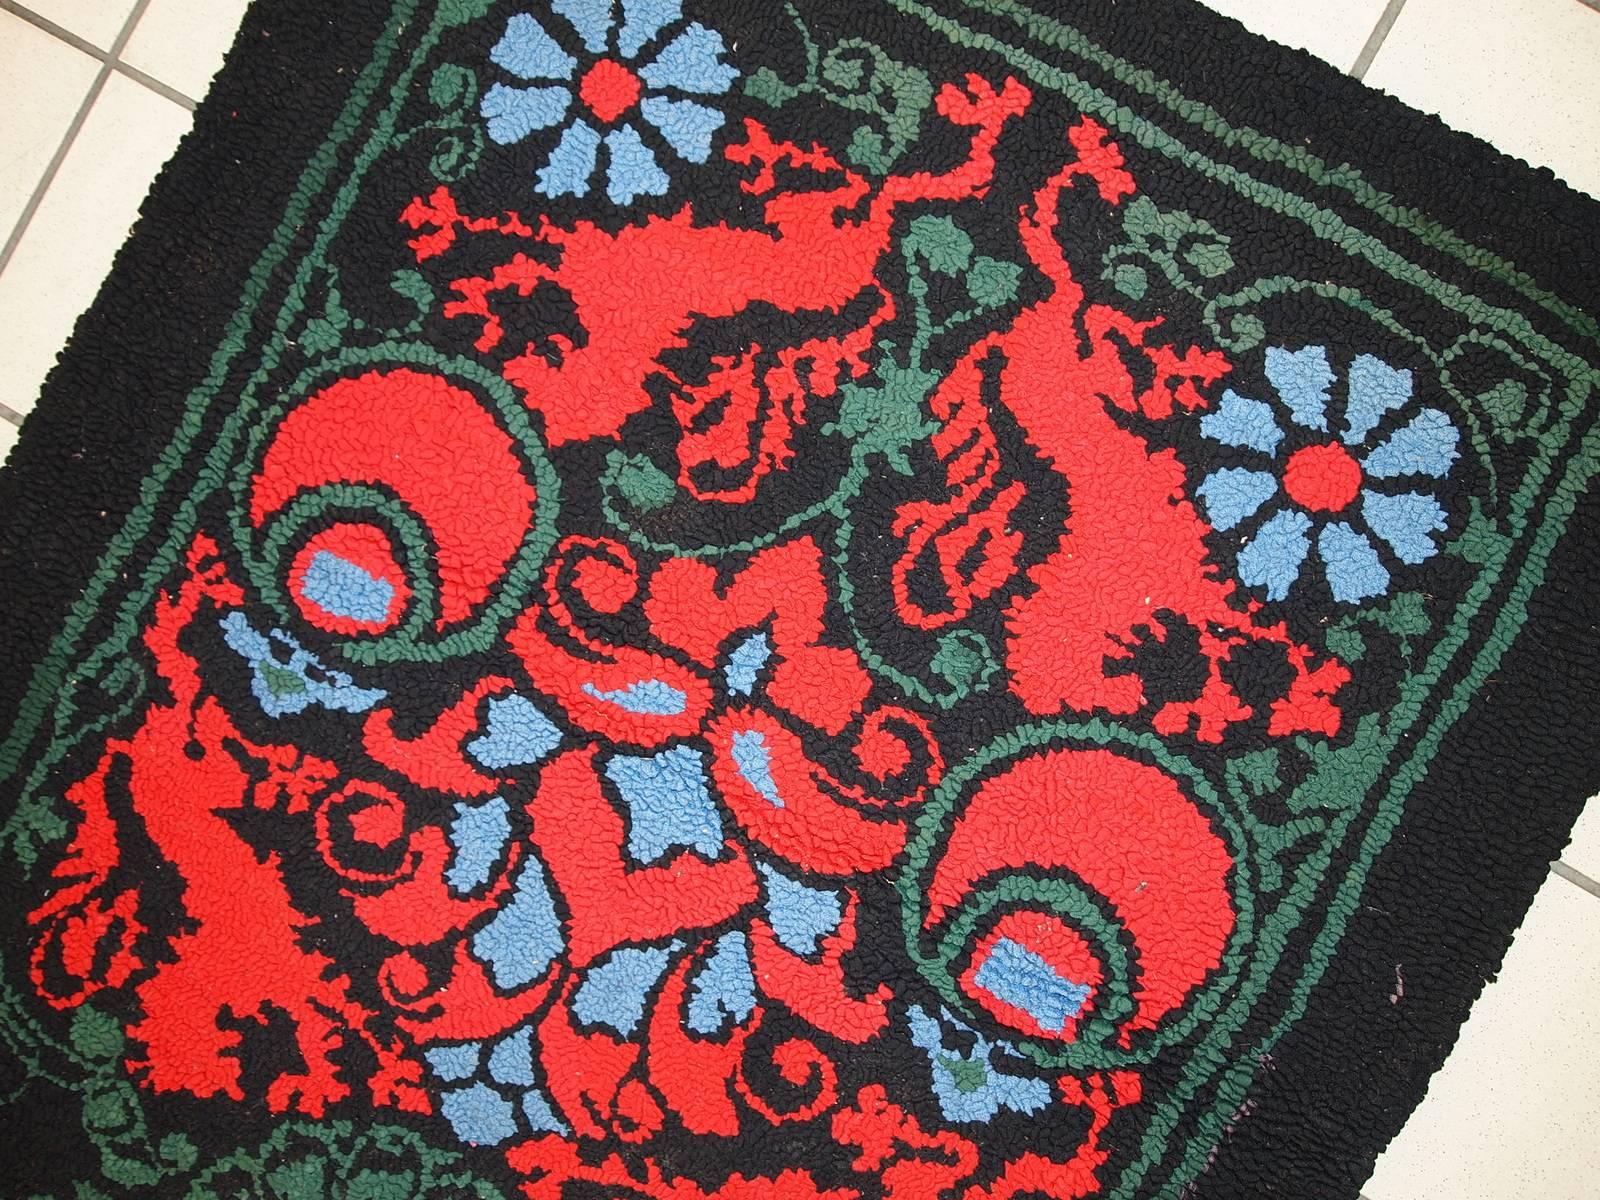 Handmade antique American hooked rug in original condition. The rug made in black shade for the background with bright red lions on it. The details are in green and sky blue shades. The rug is very thick and heavy made in high quality.